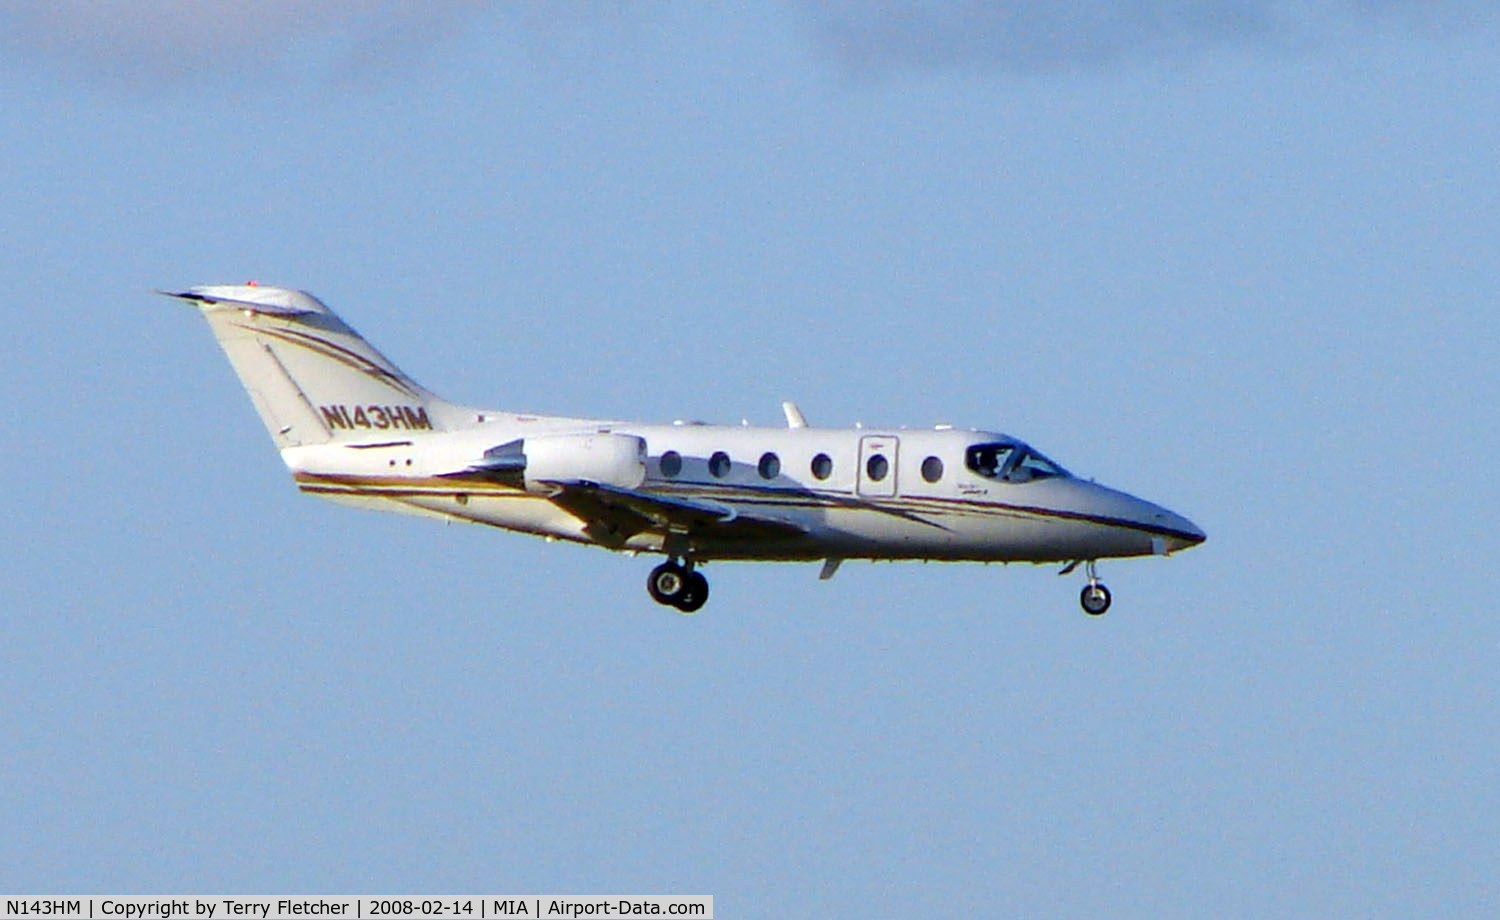 N143HM, 1998 Raytheon Aircraft Company 400A C/N RK-205, Beechjet 400 on approach to Miami